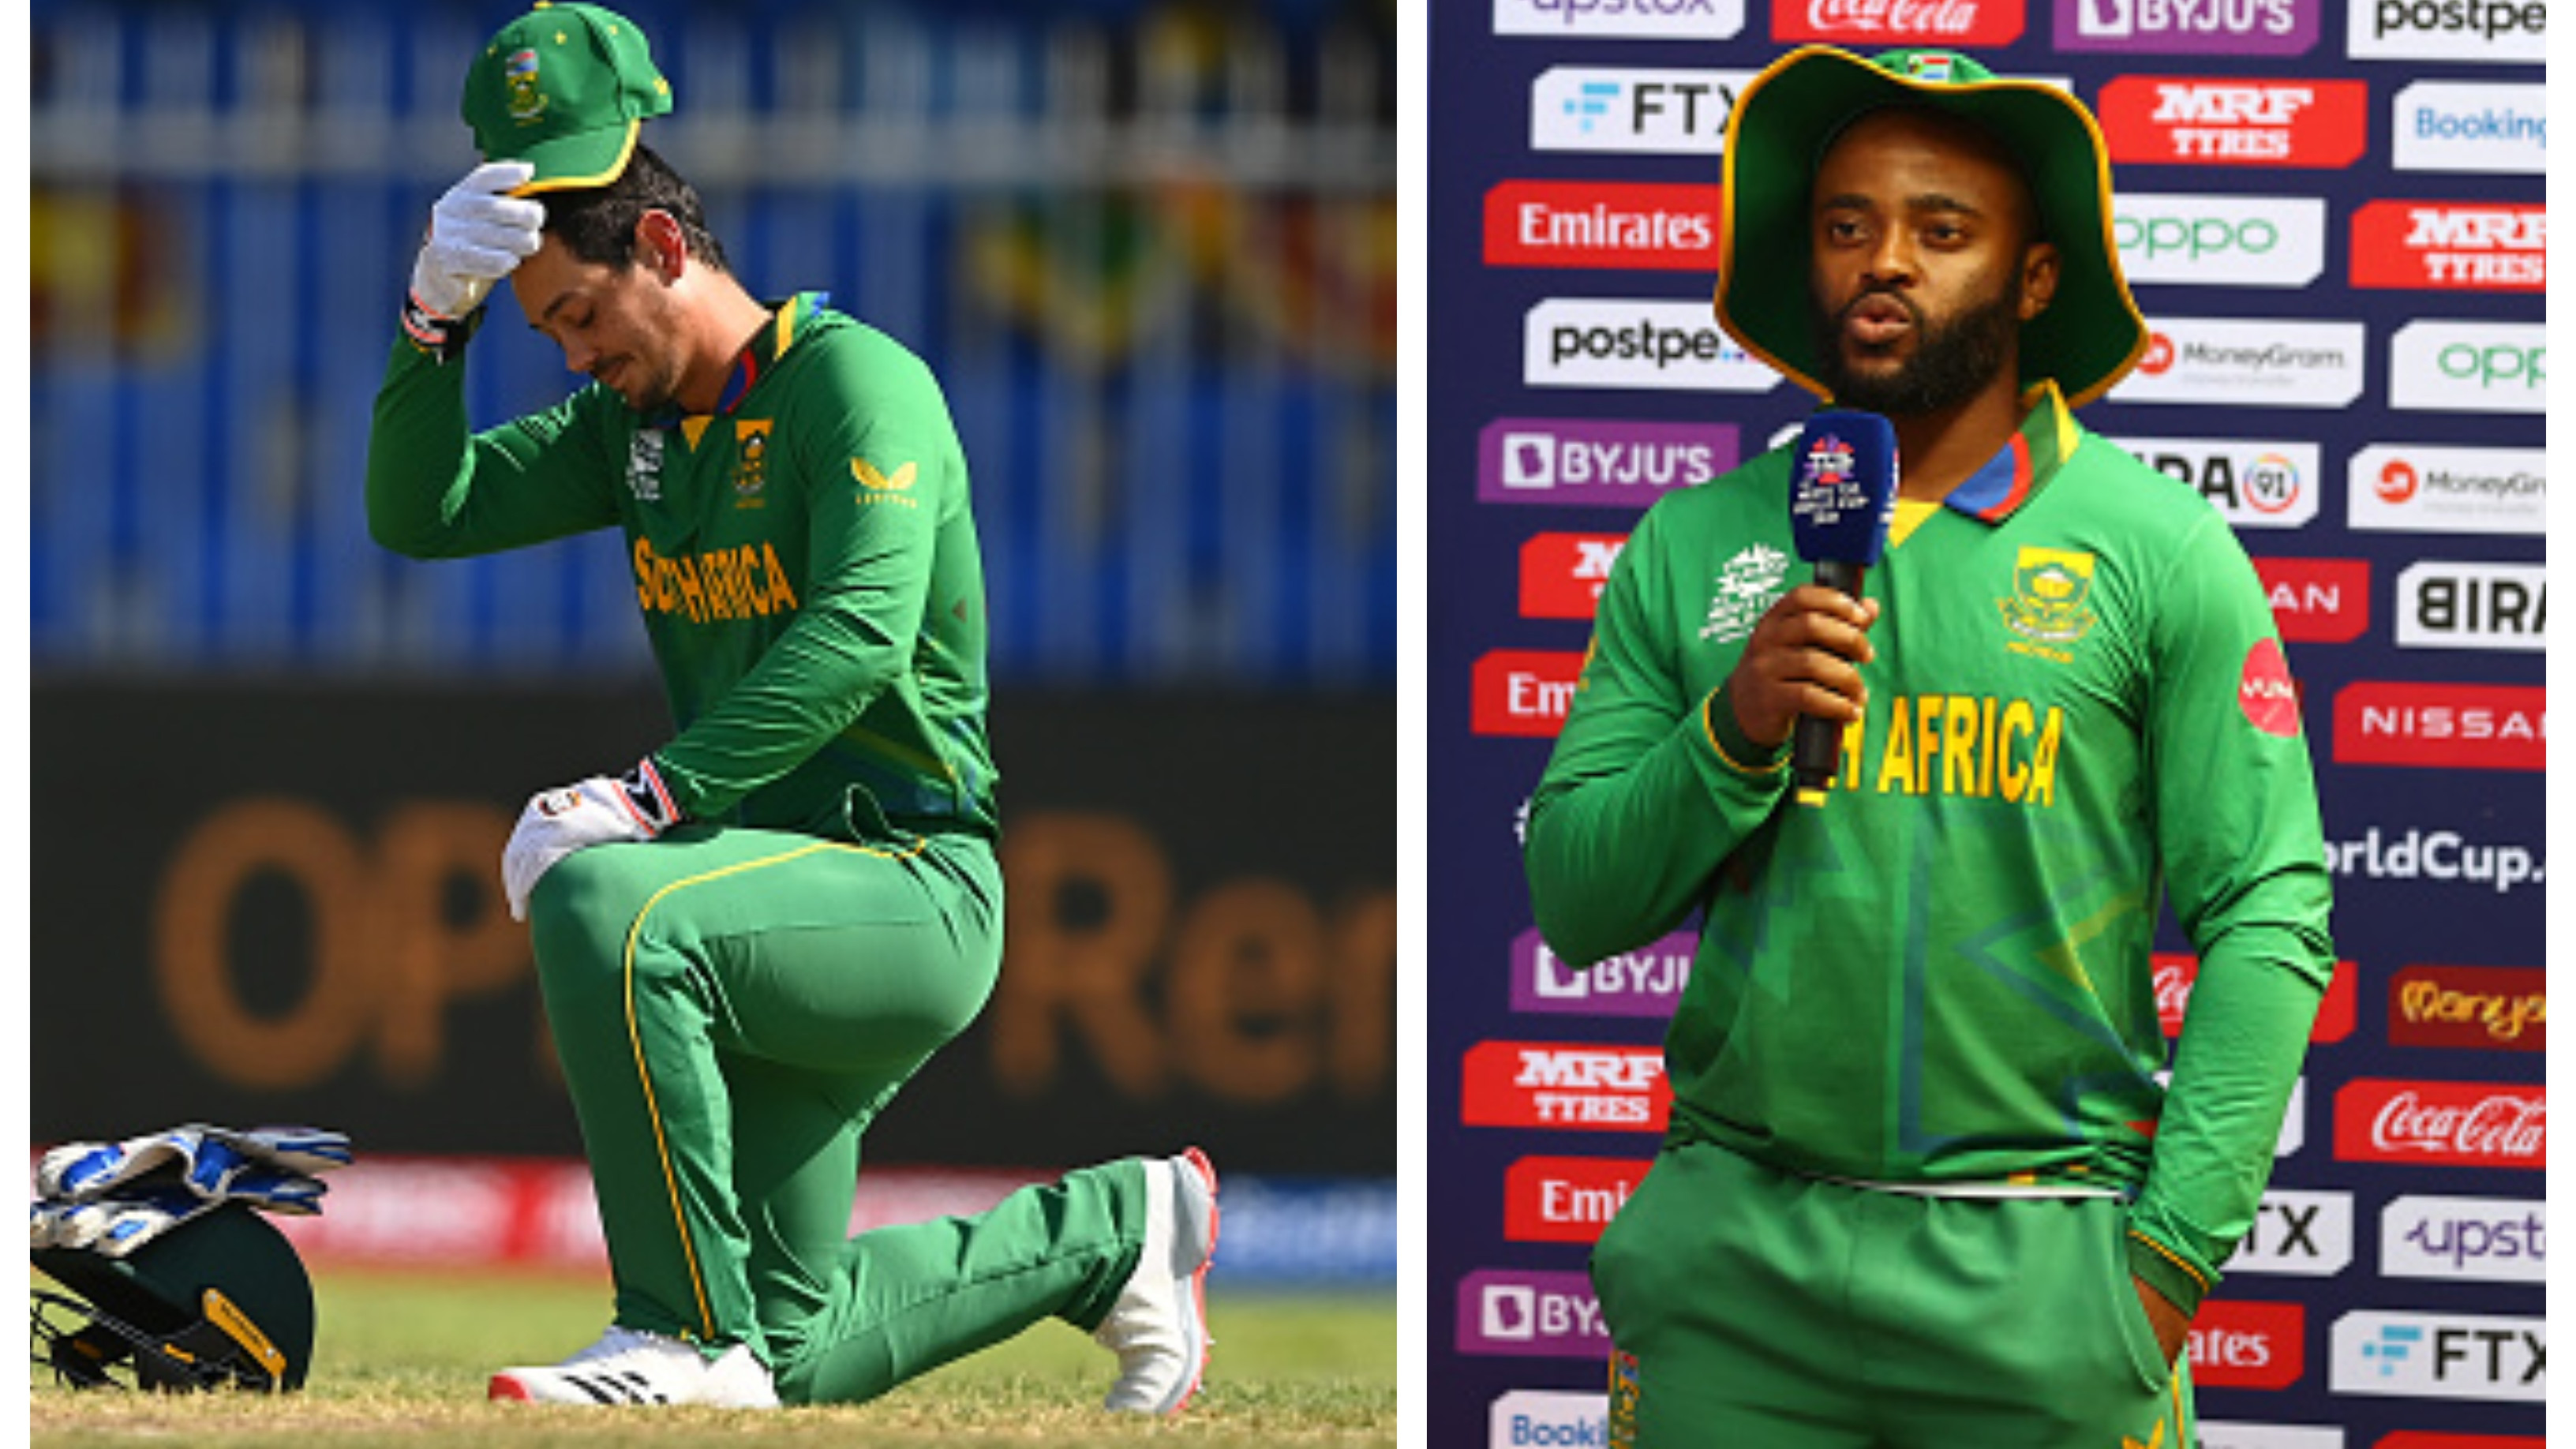 T20 World Cup 2021: Bavuma admits De Kock controversy was at the back of his mind ahead of Sri Lanka game